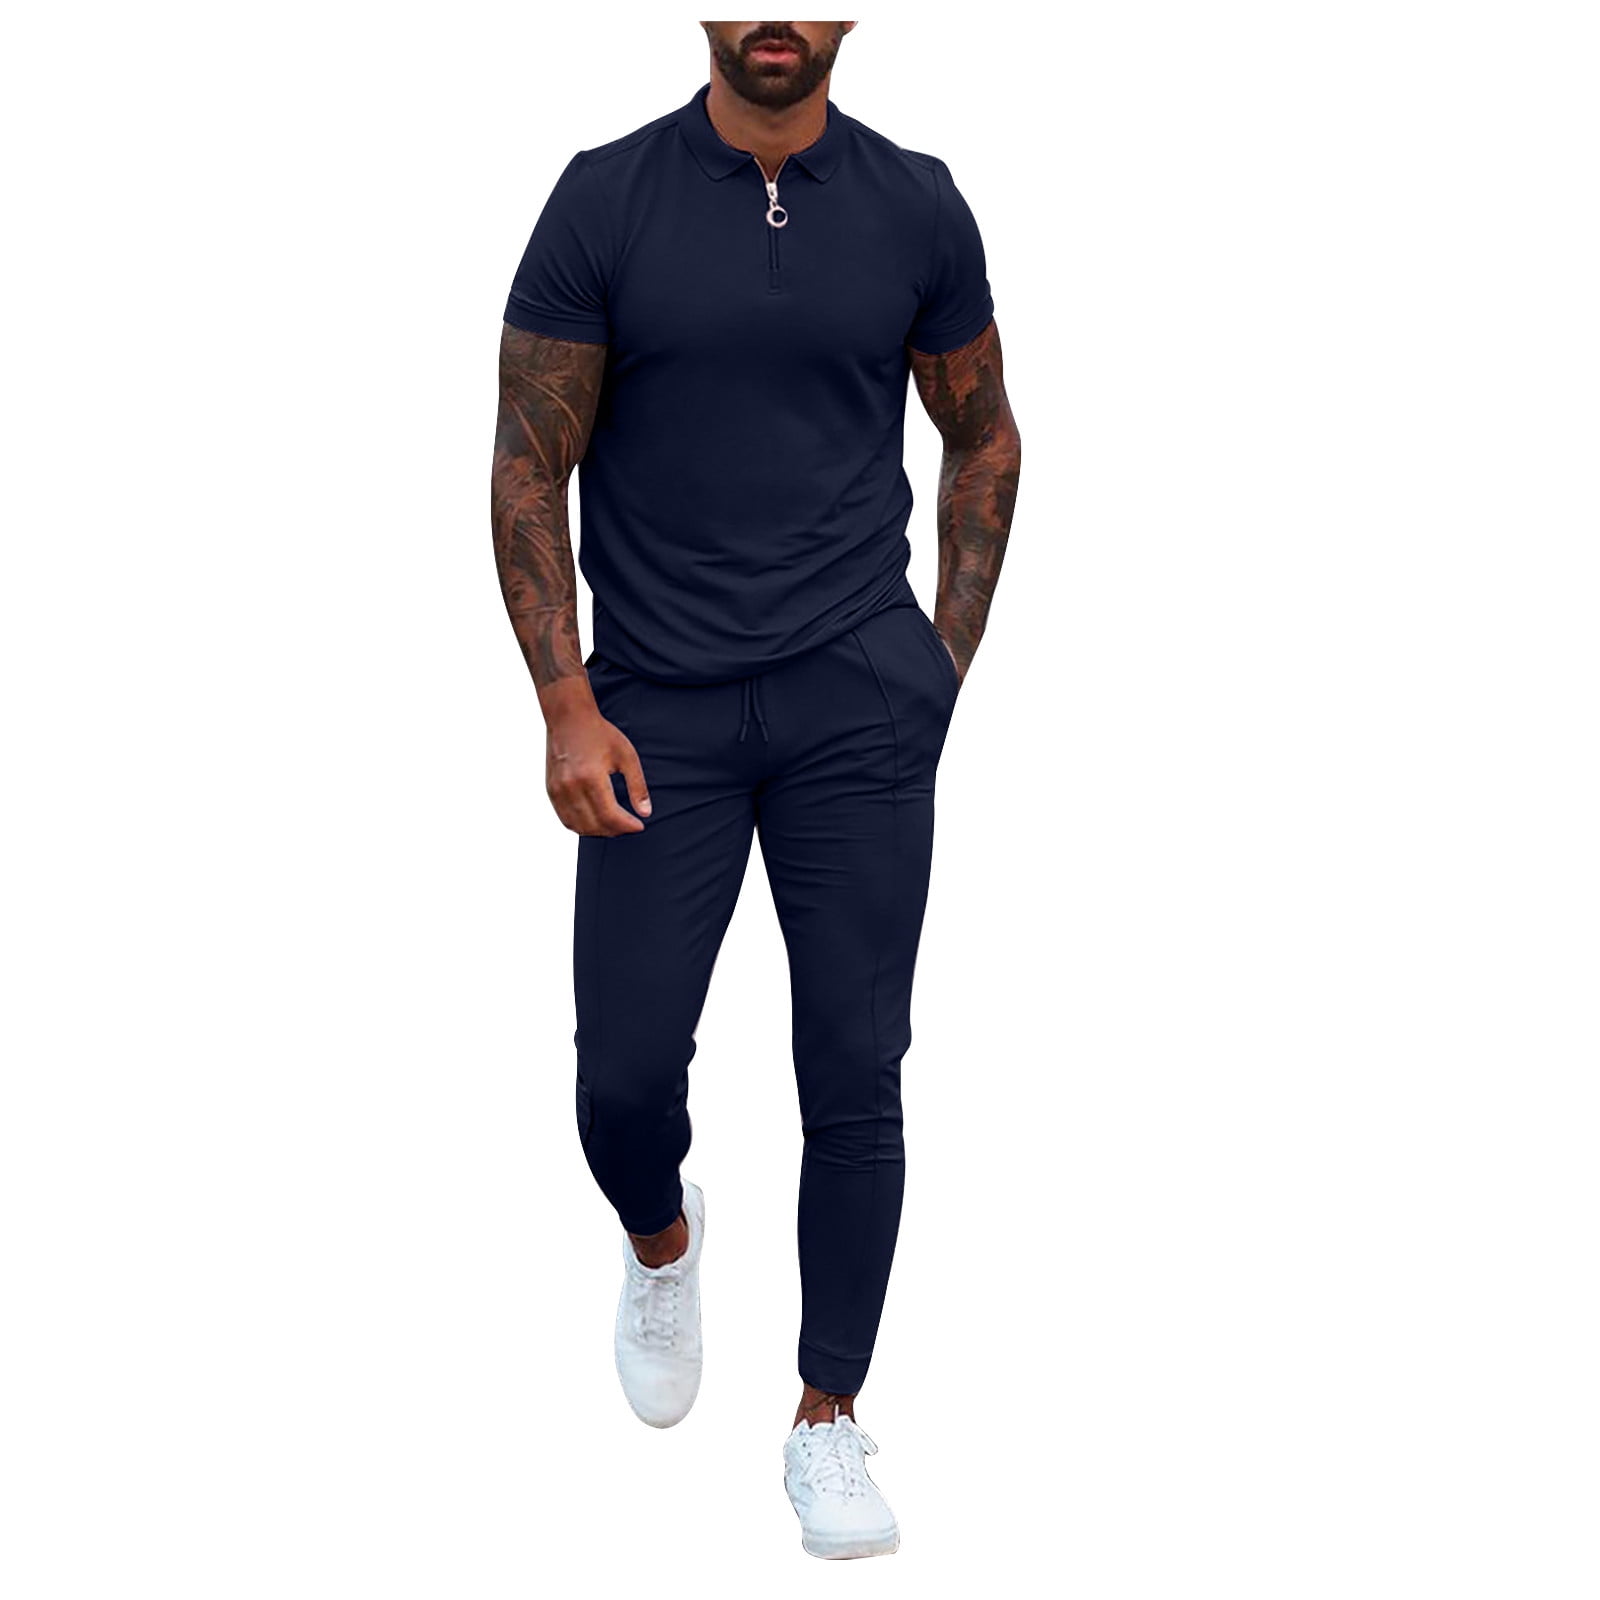 Amtdh Men's Muscularfit Sweatsuits Clearance Pure Color Soft 2 Piece ...